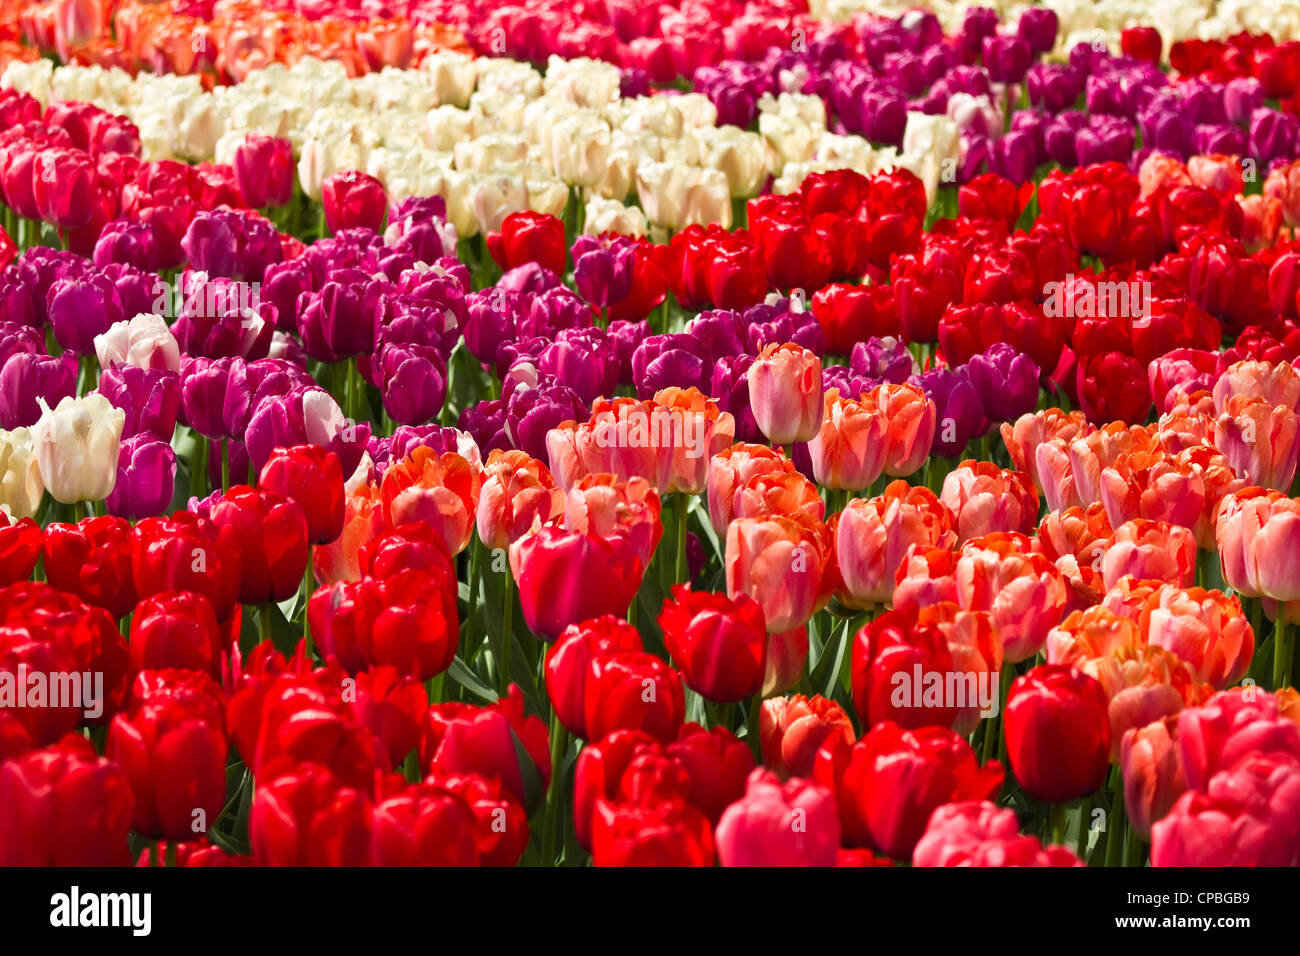 Tulips in spring background in red, purple, pink and white Stock Photo